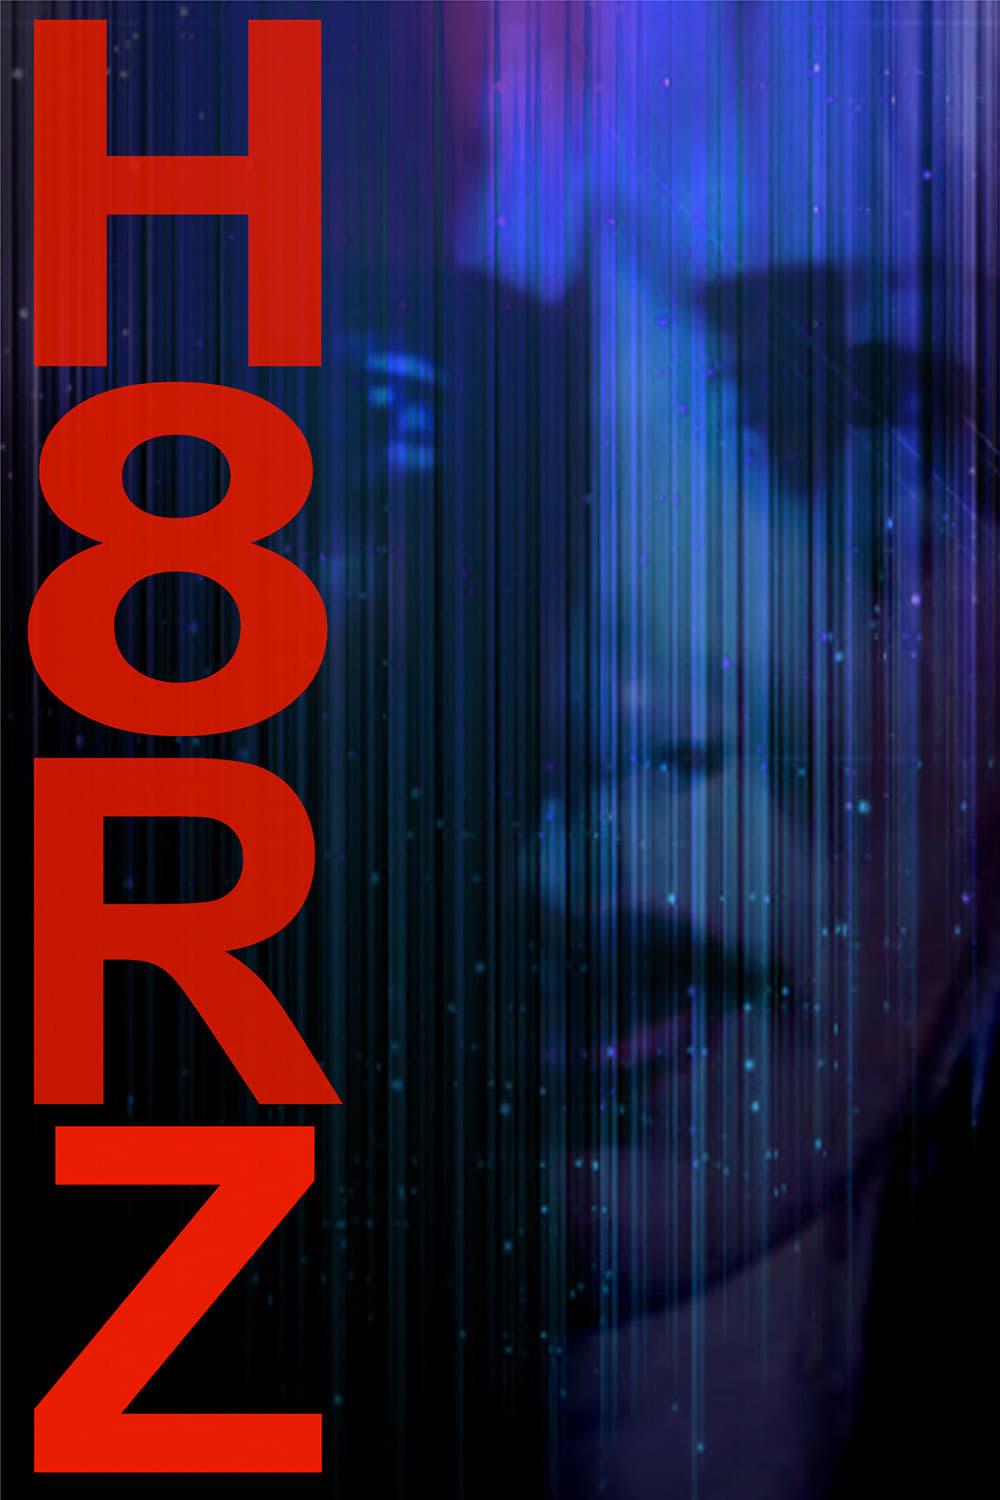 H8RZ poster